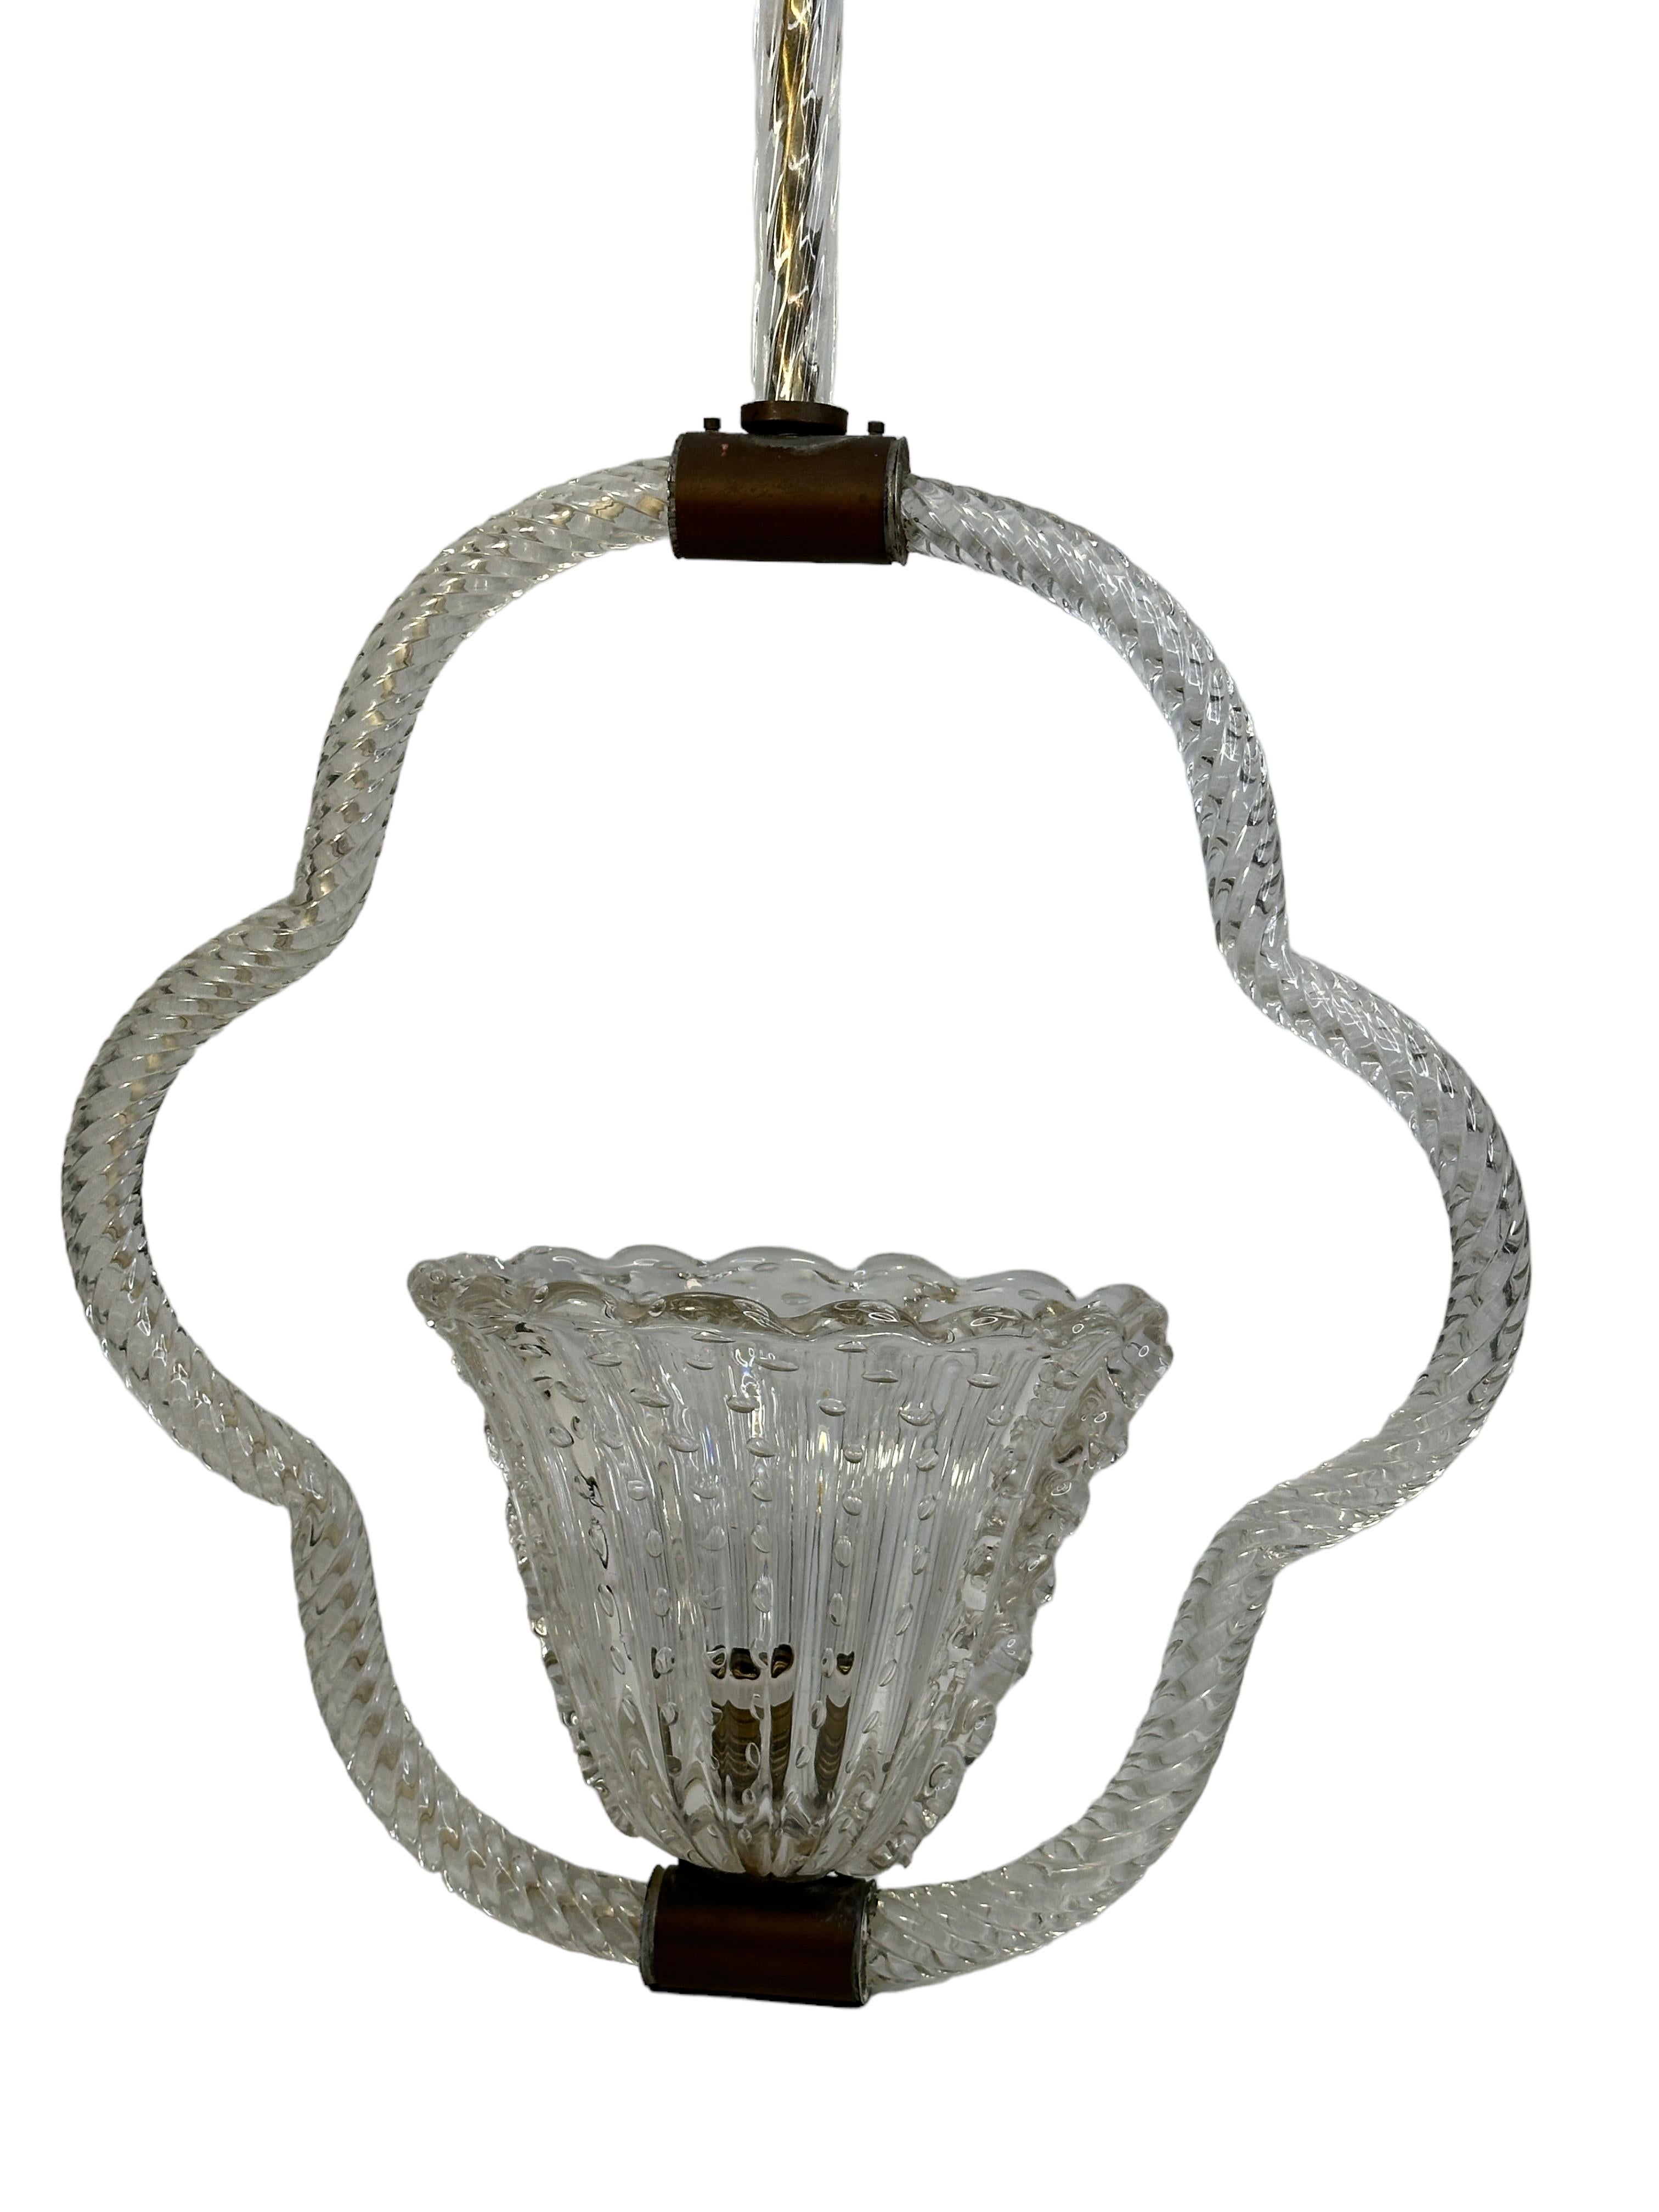 Stunning Large Barovier Toso Pendant Light Chandelier Murano Glass Basket, 1930s In Good Condition For Sale In Nuernberg, DE